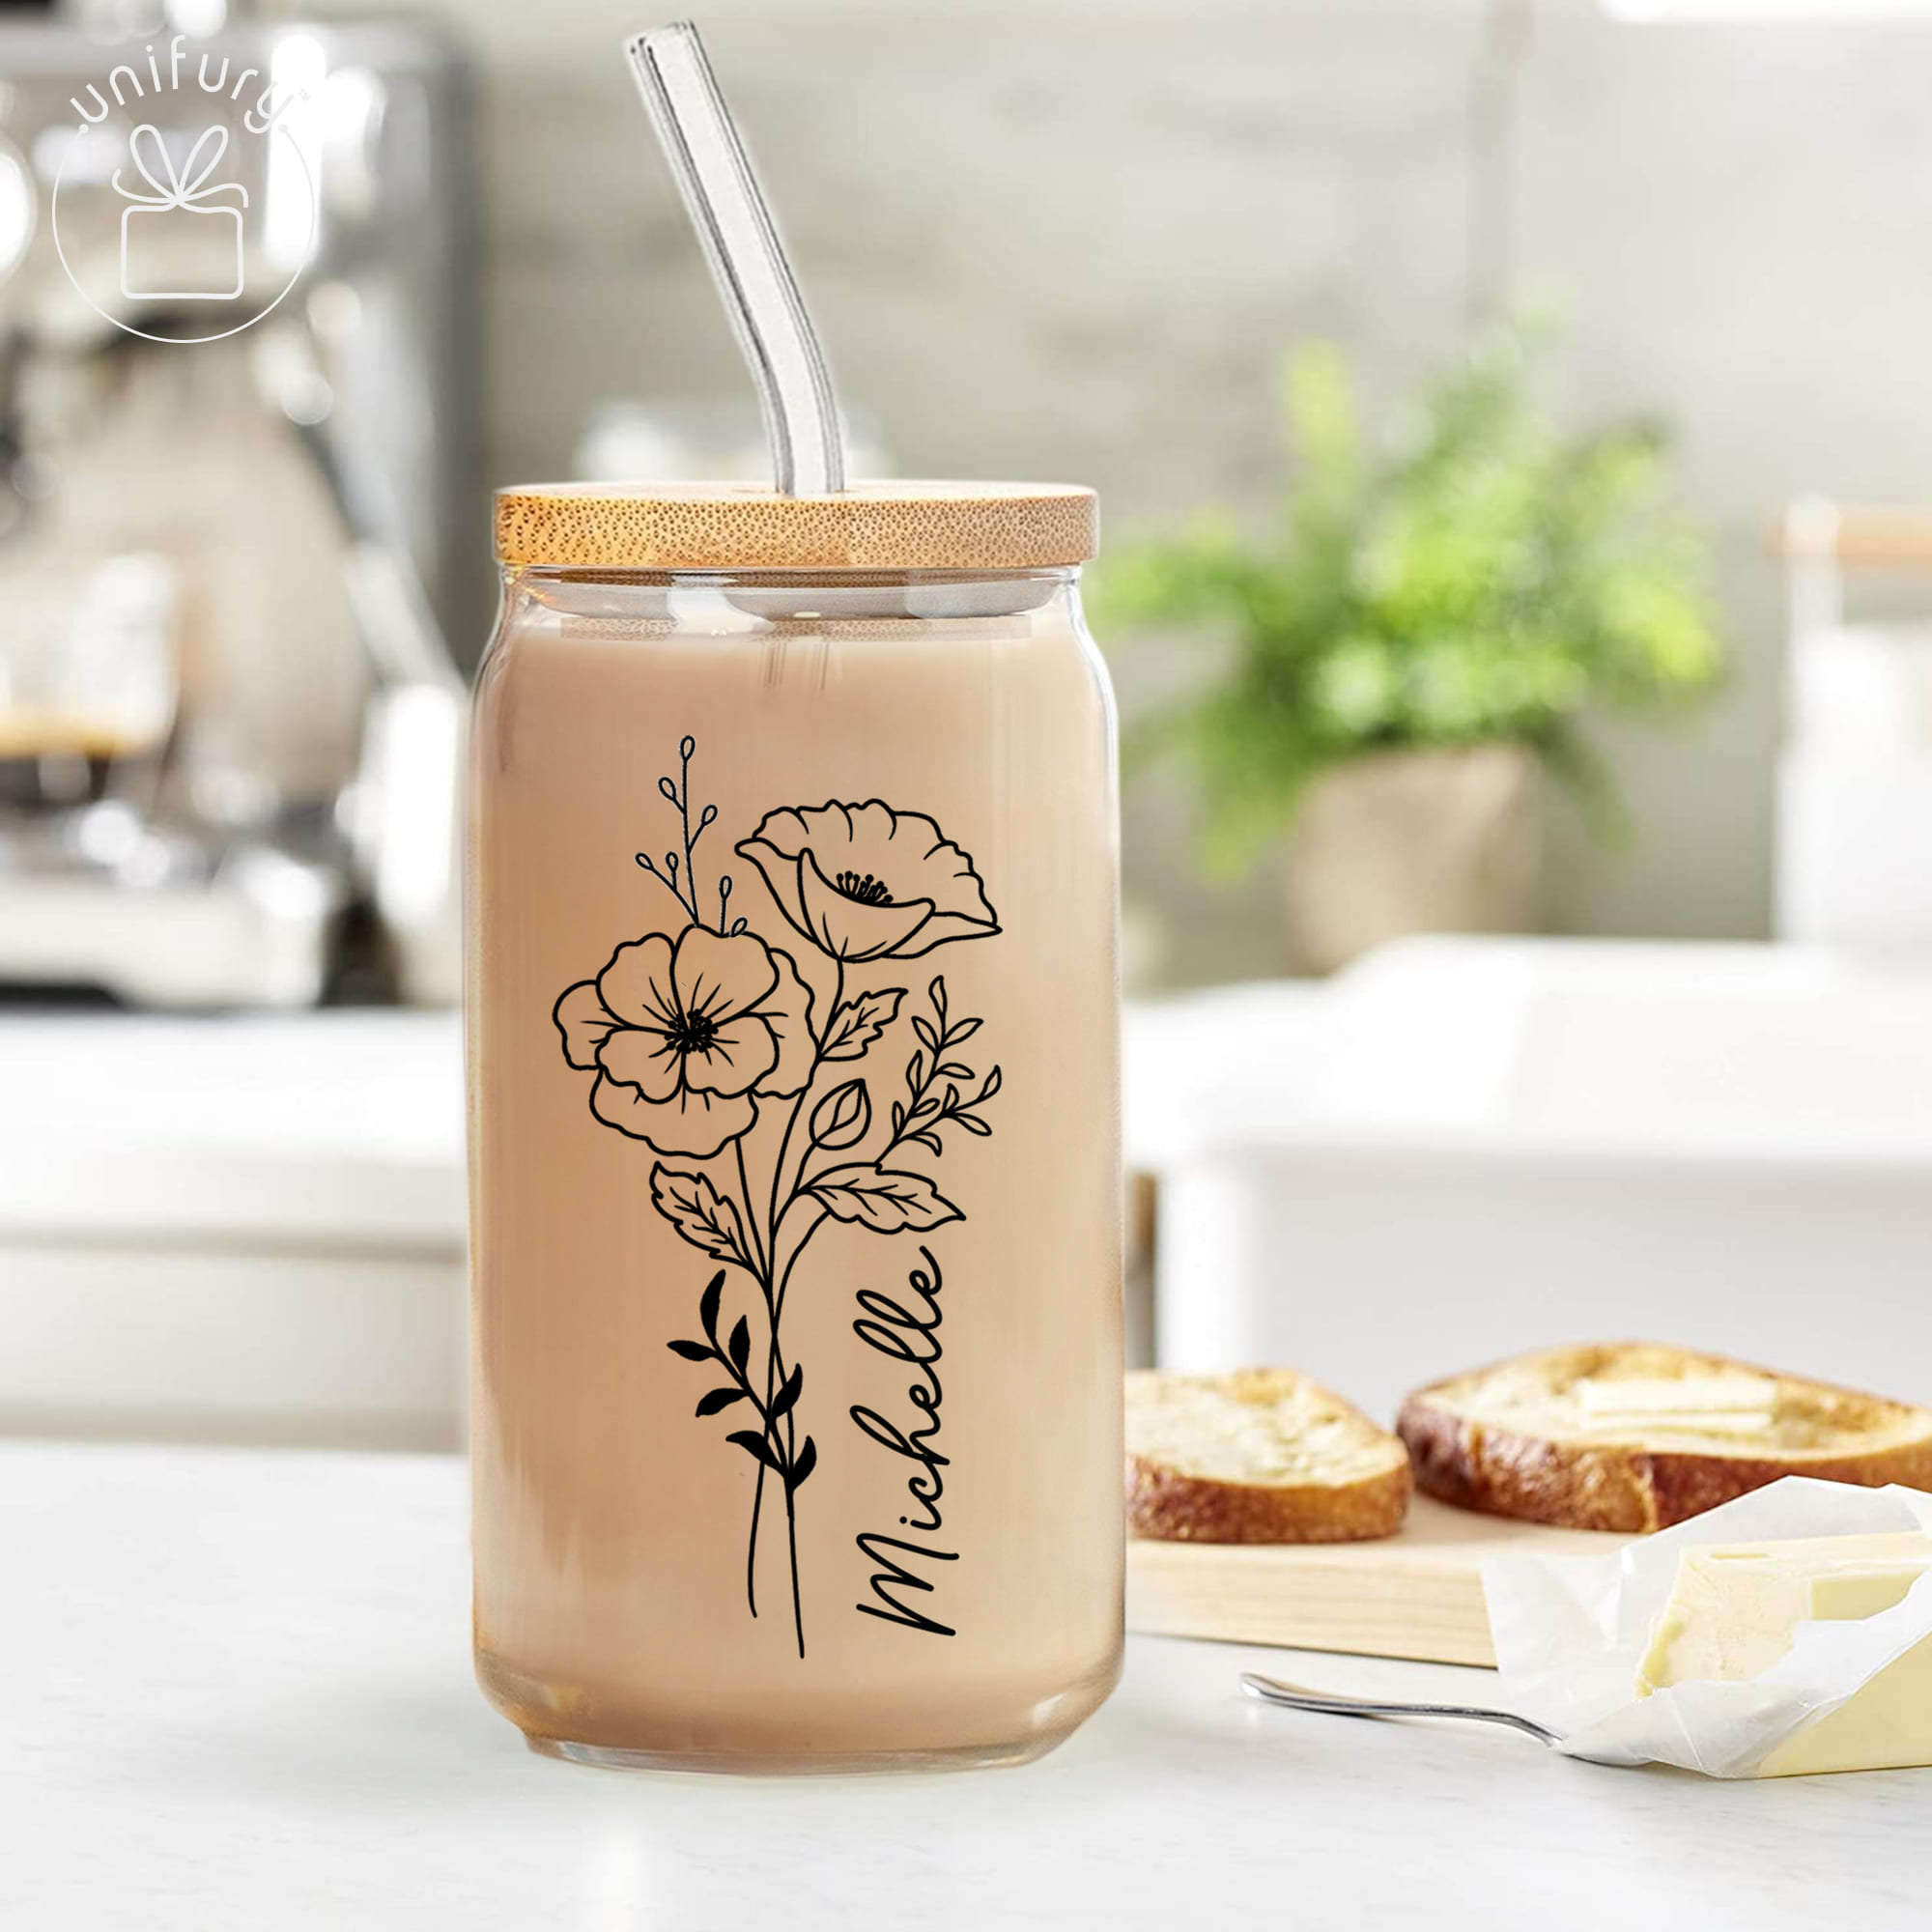 Personalized Mason Jar Drinking Glasses with Flower Lids